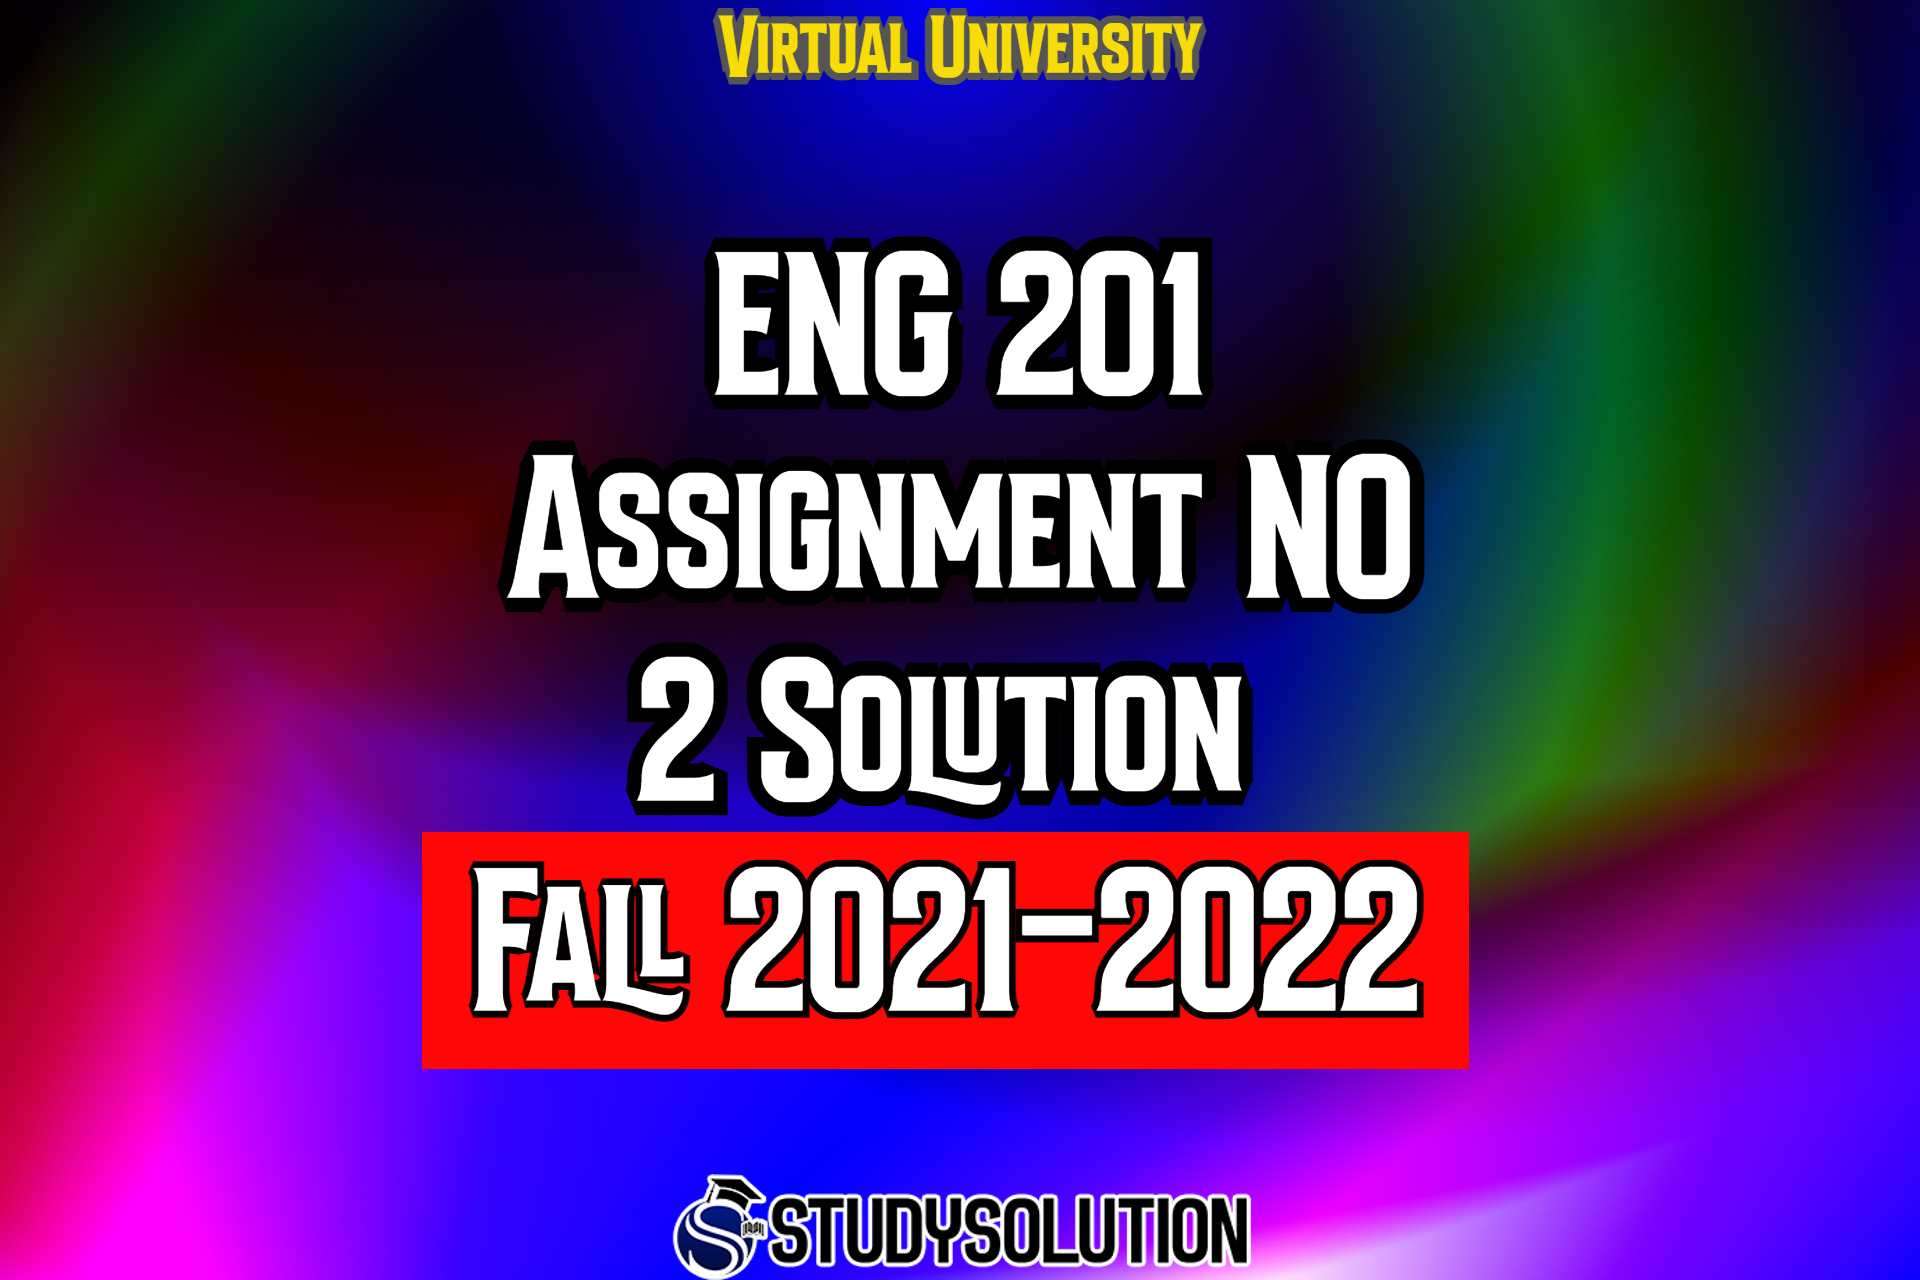 ENG201 Assignment No 2 Solution Fall 2022